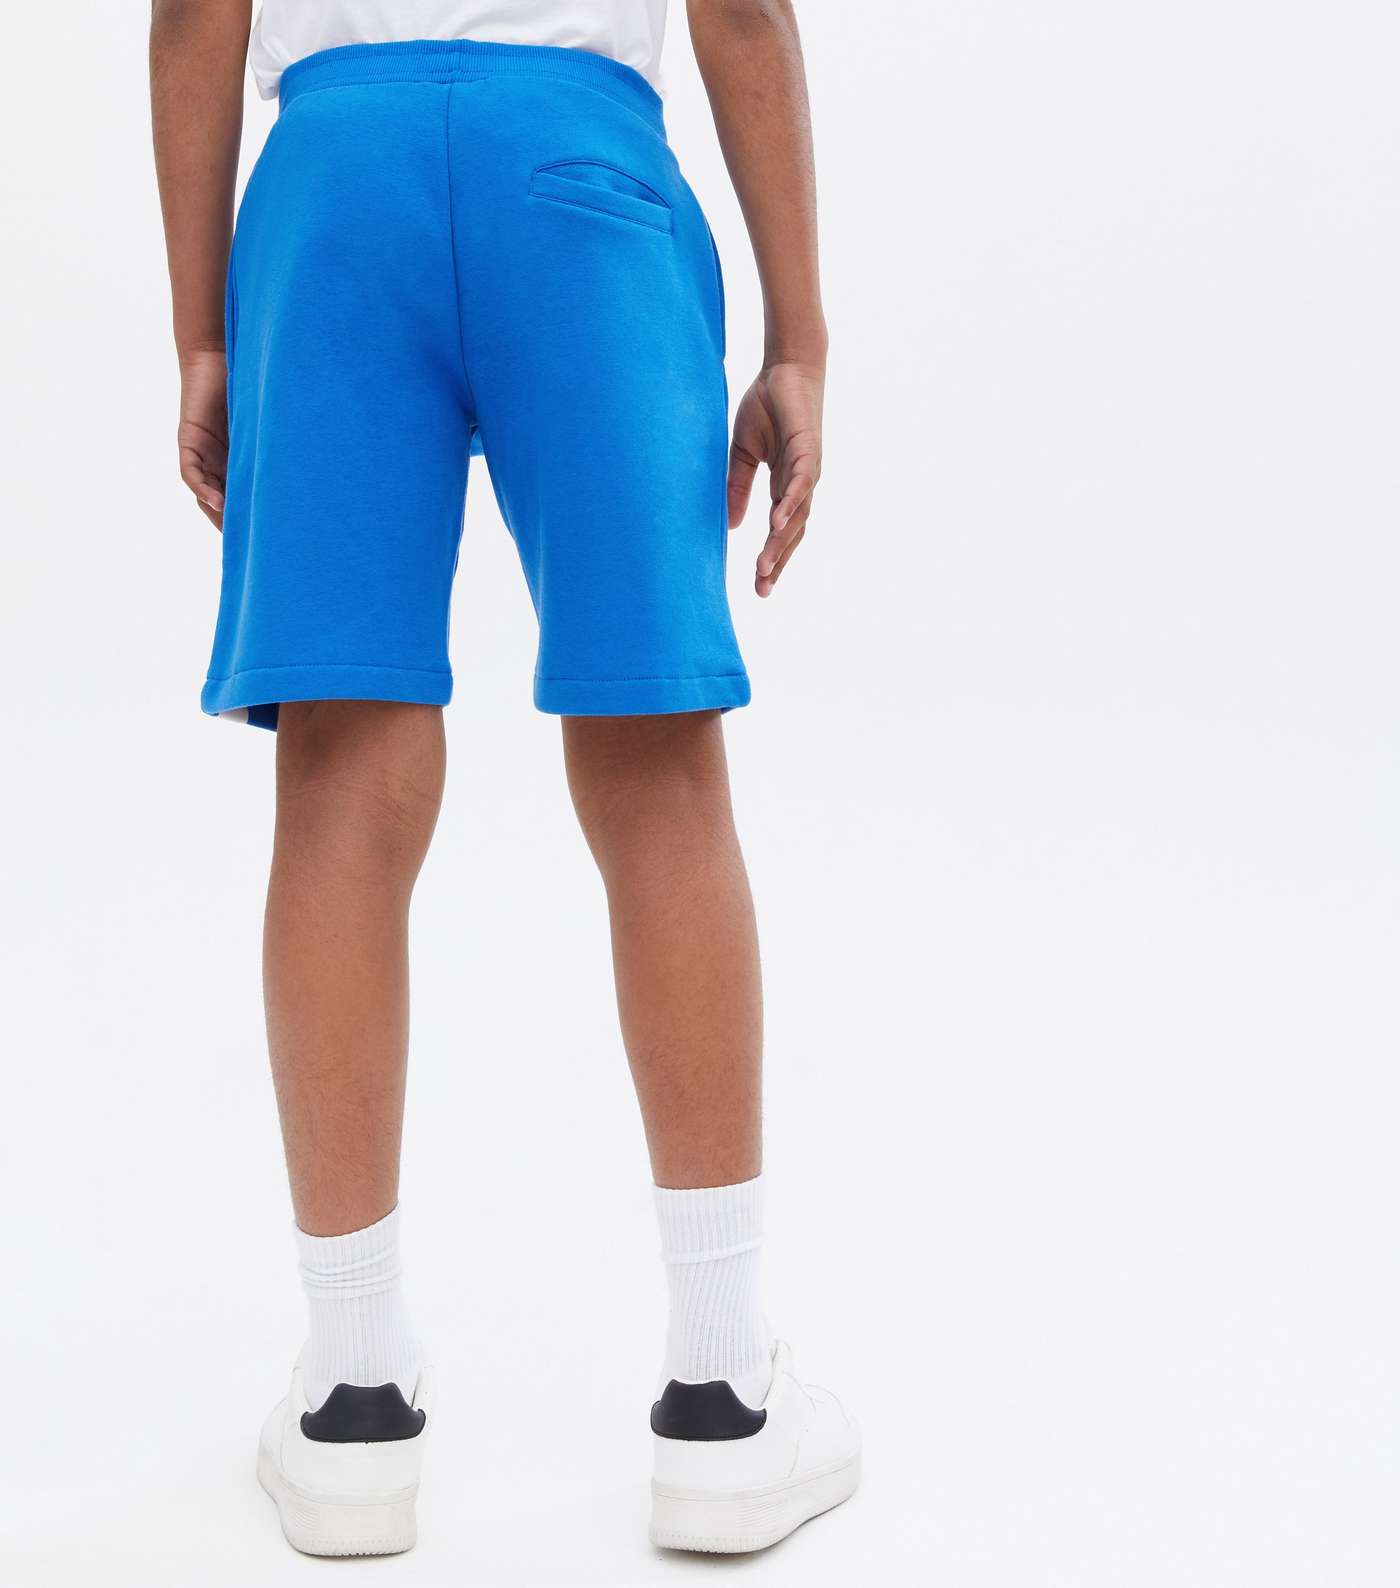 Boys 2 Pack Bright Blue and Black Jersey Shorts Image 4